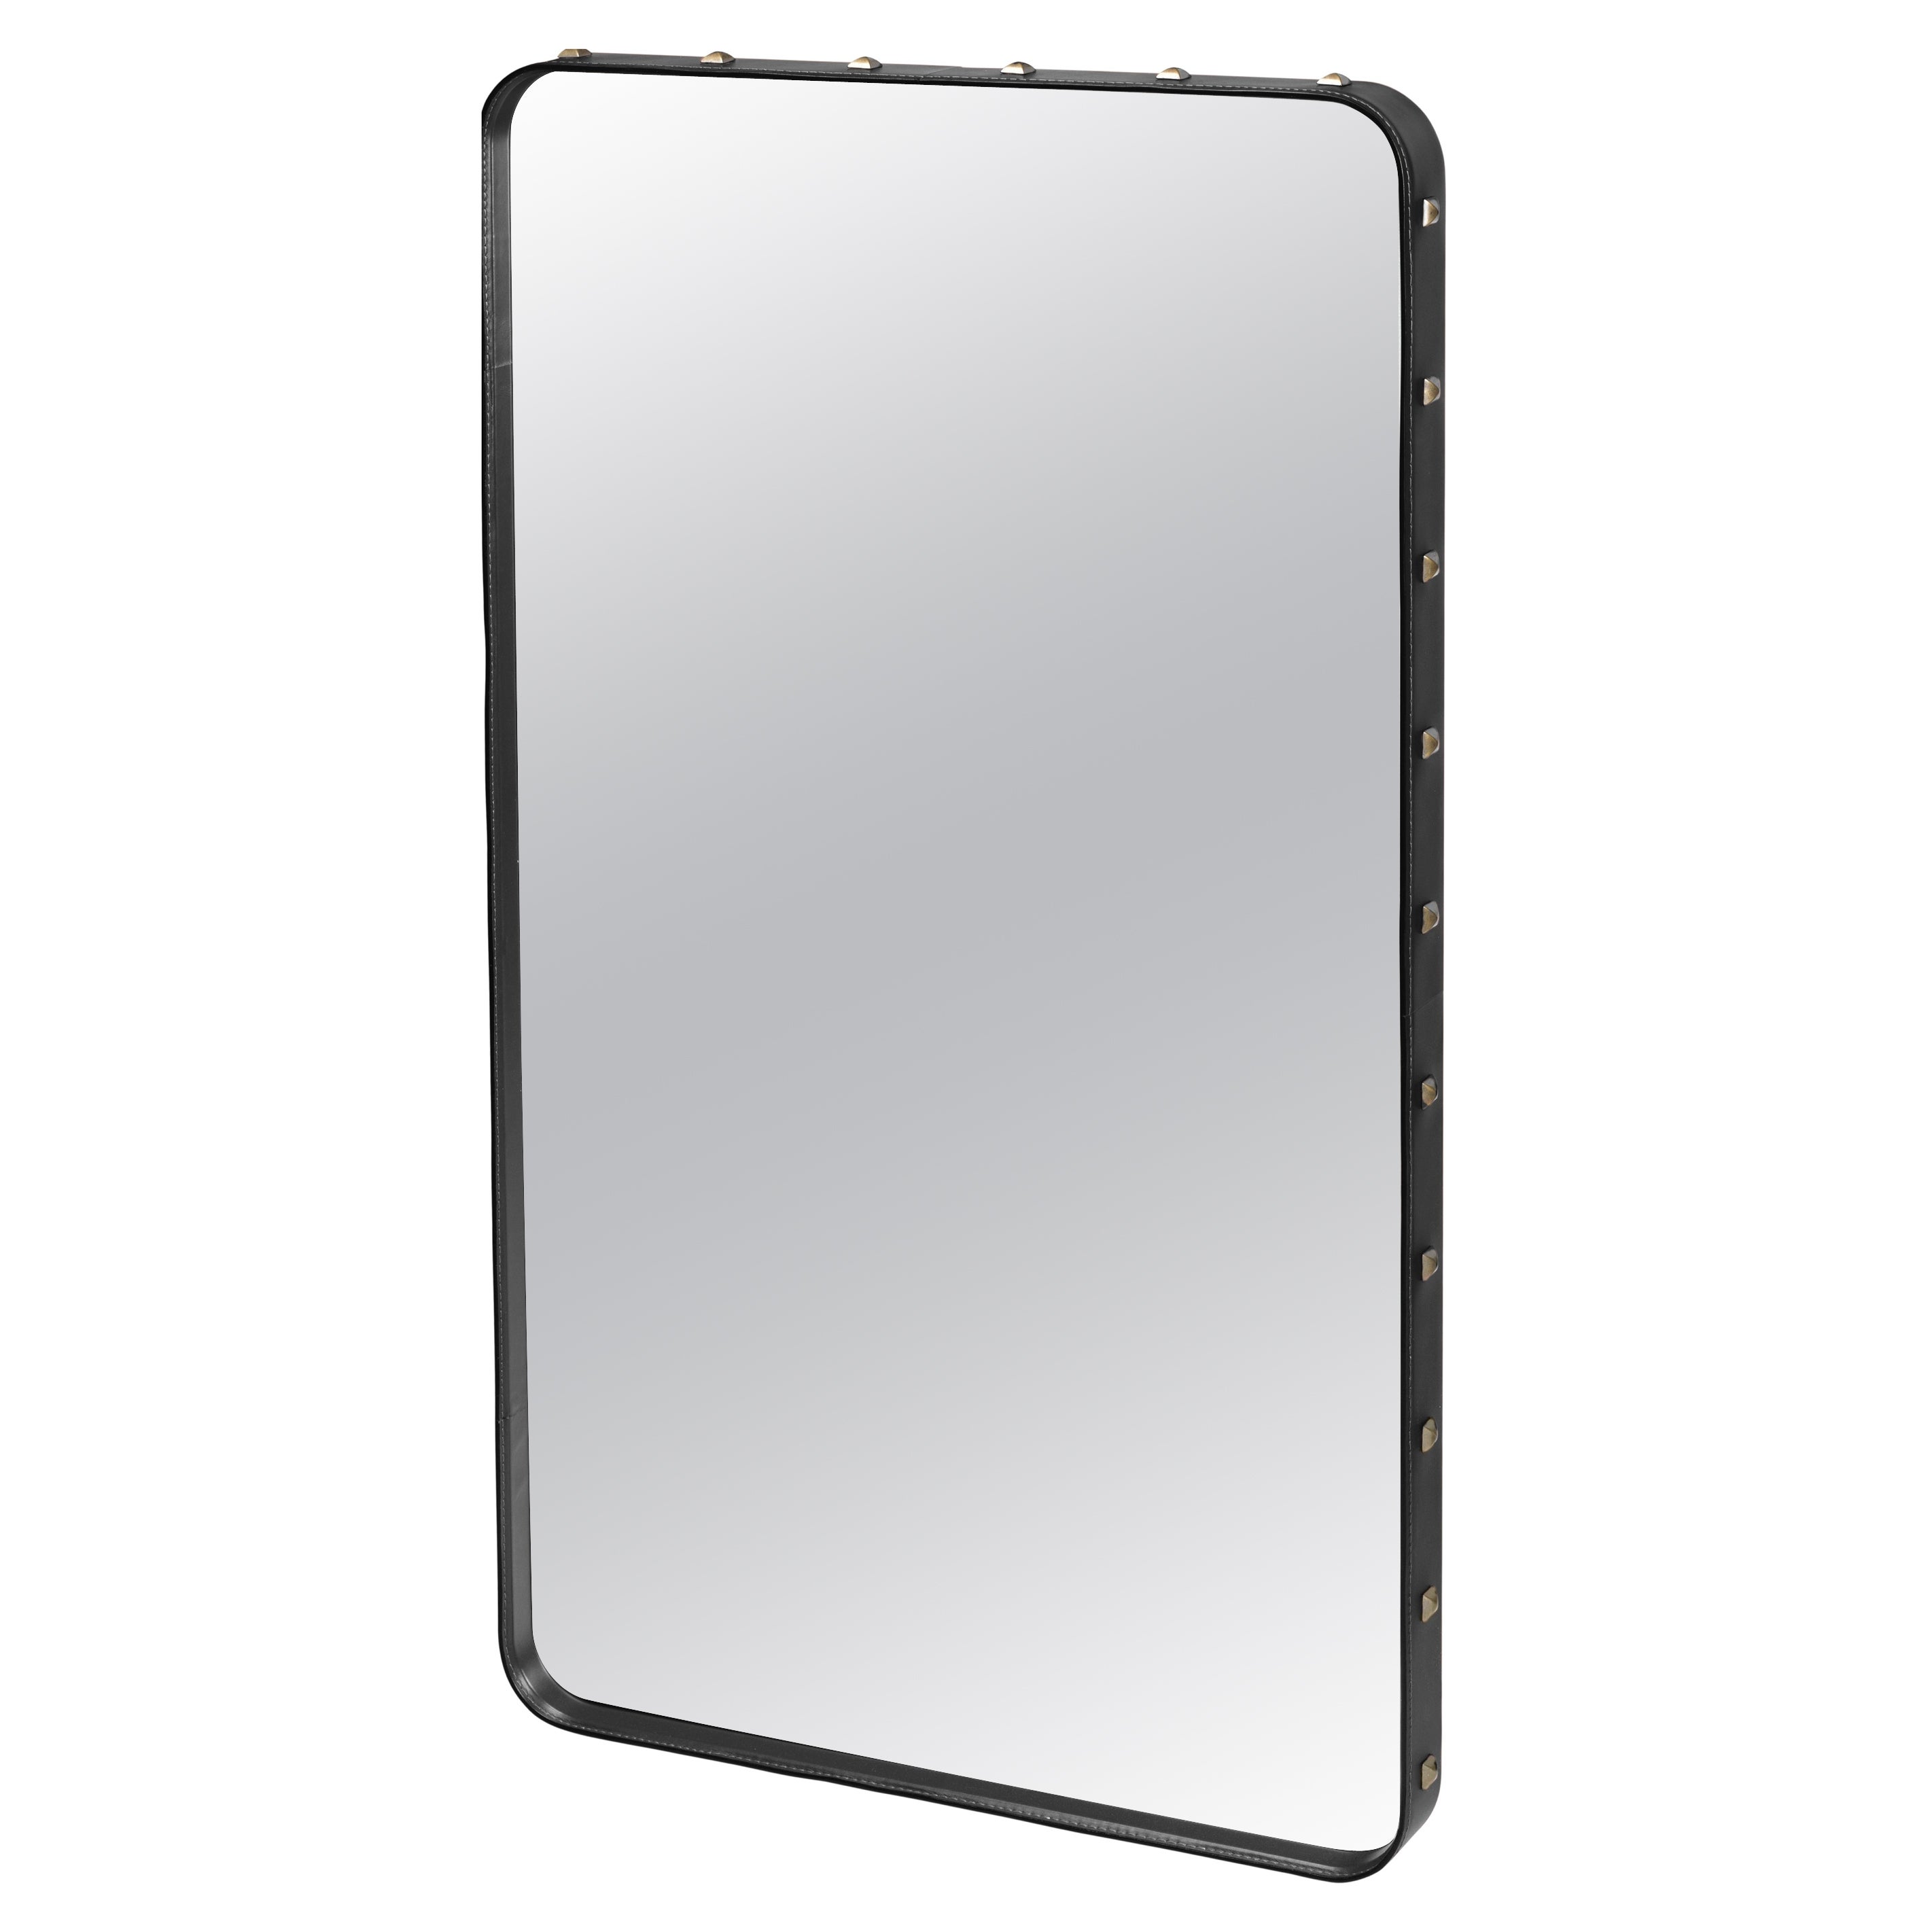 Medium Jacques Adnet 'Rectangulaire' Wall Mirror in Black Leather for GUBI